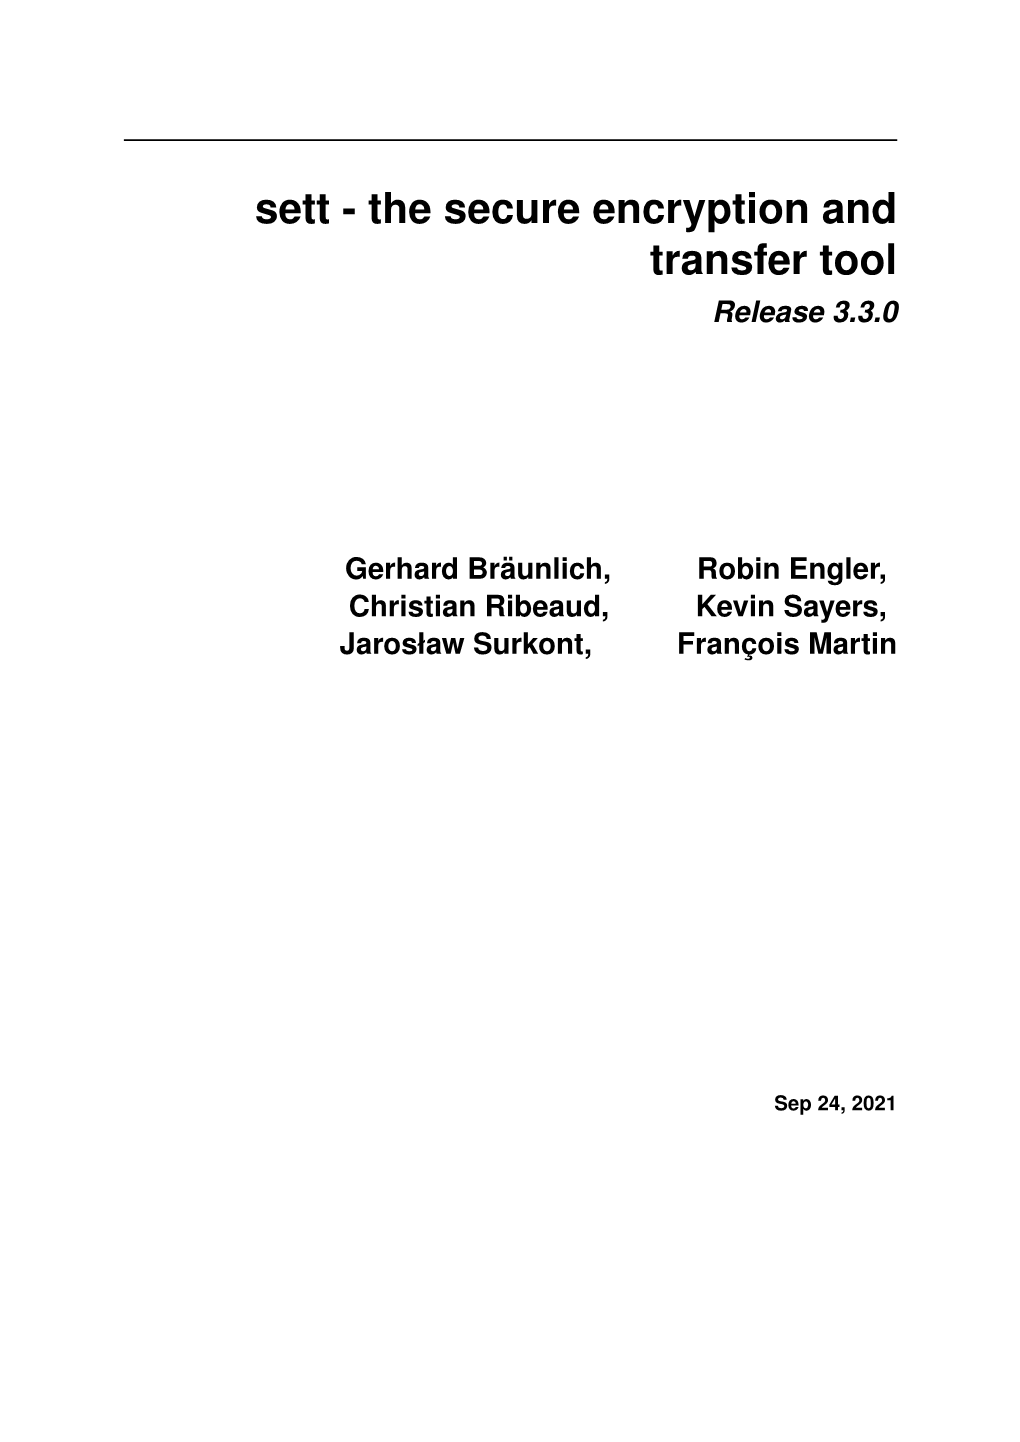 The Secure Encryption and Transfer Tool Release 3.3.0